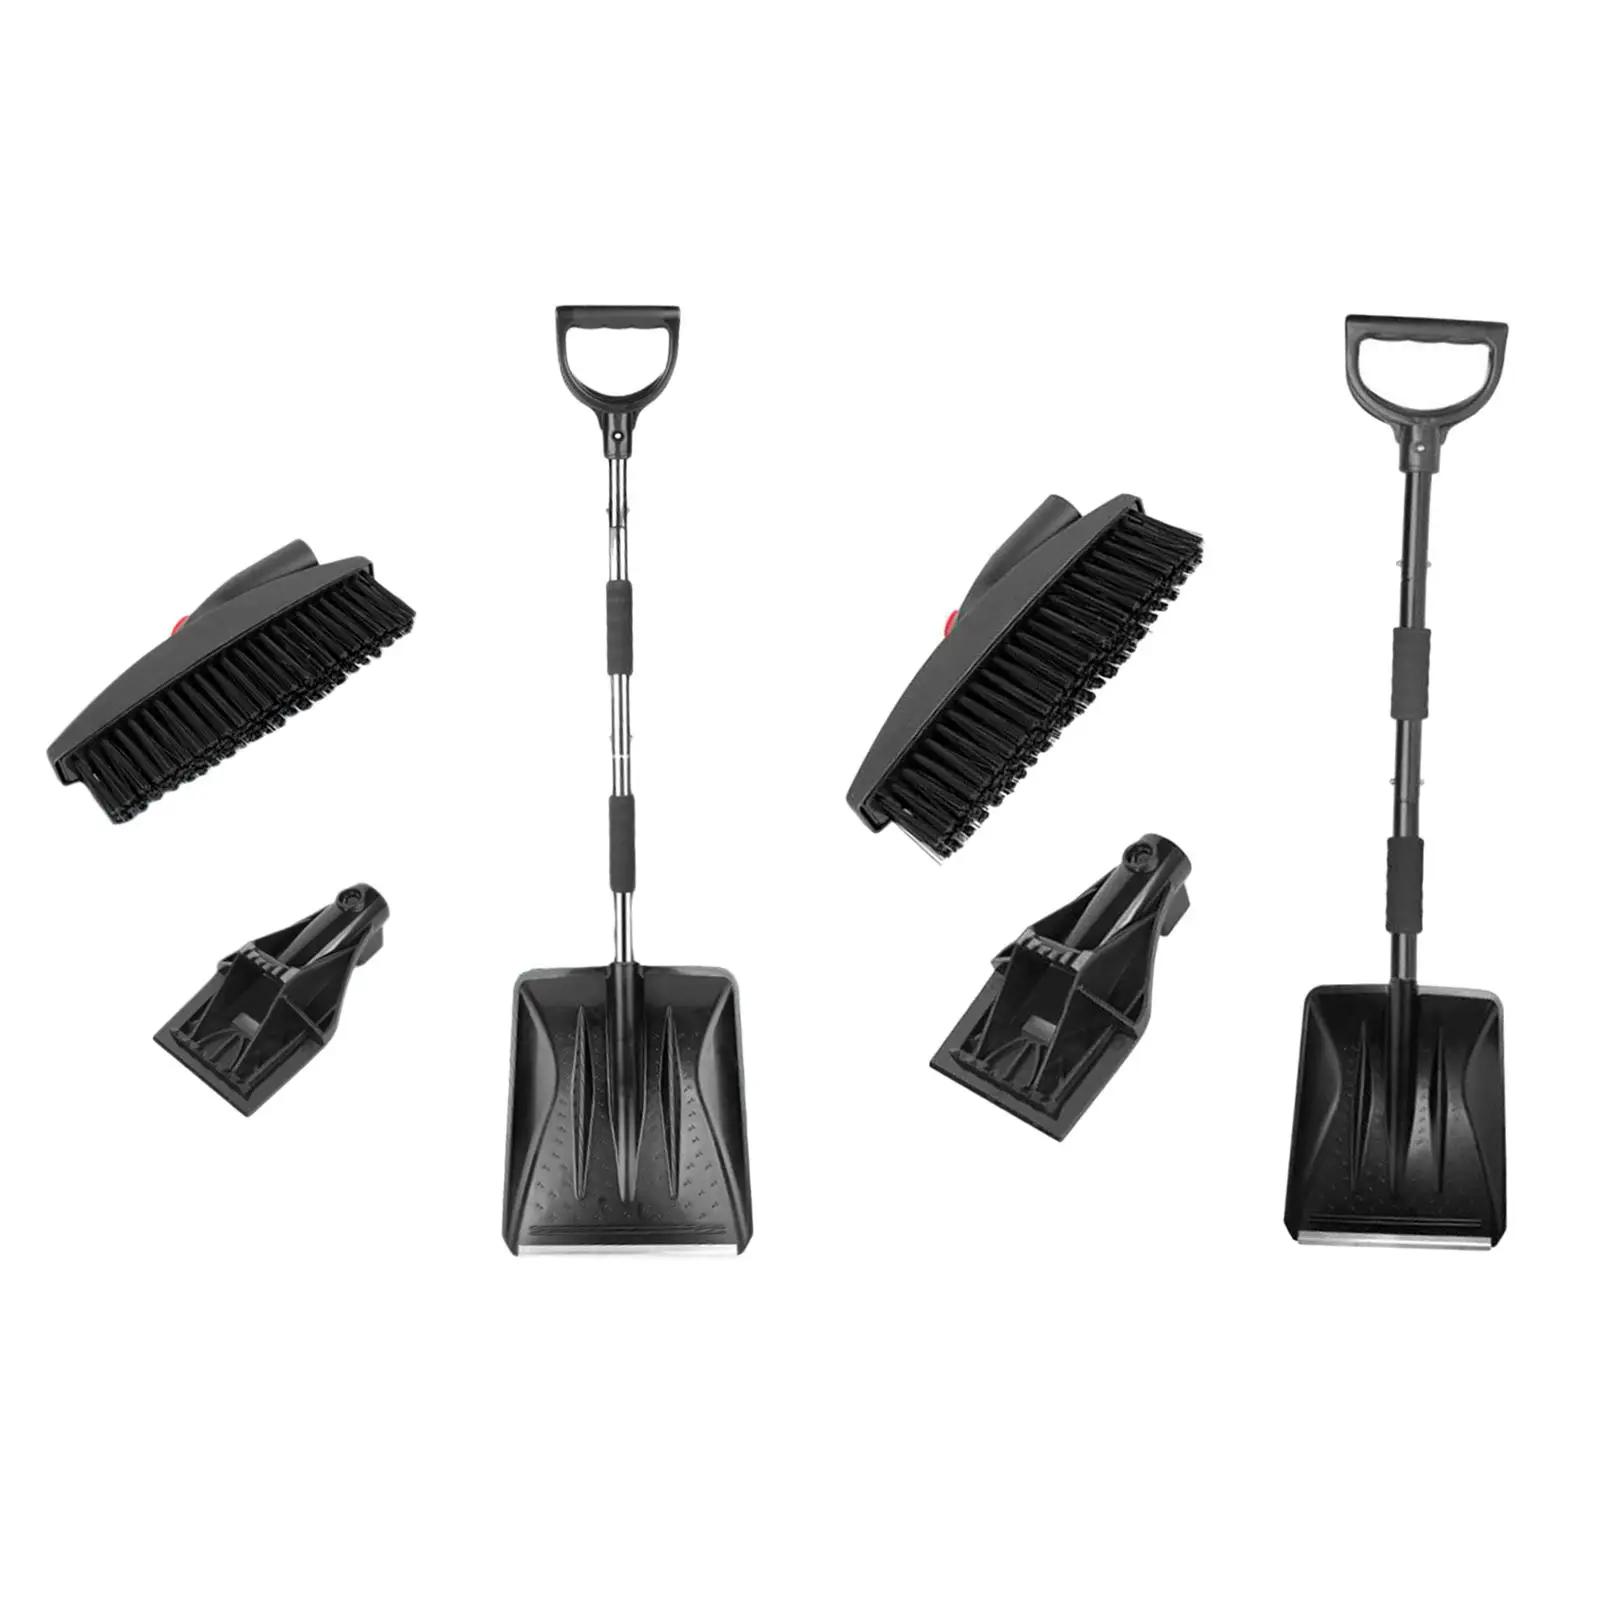 Snow Brush Scraper Snow Shovel for Car 3 in 1 Comfortable Gripping Auto Durable Car Defrosting Scraper Snow Removal Tools